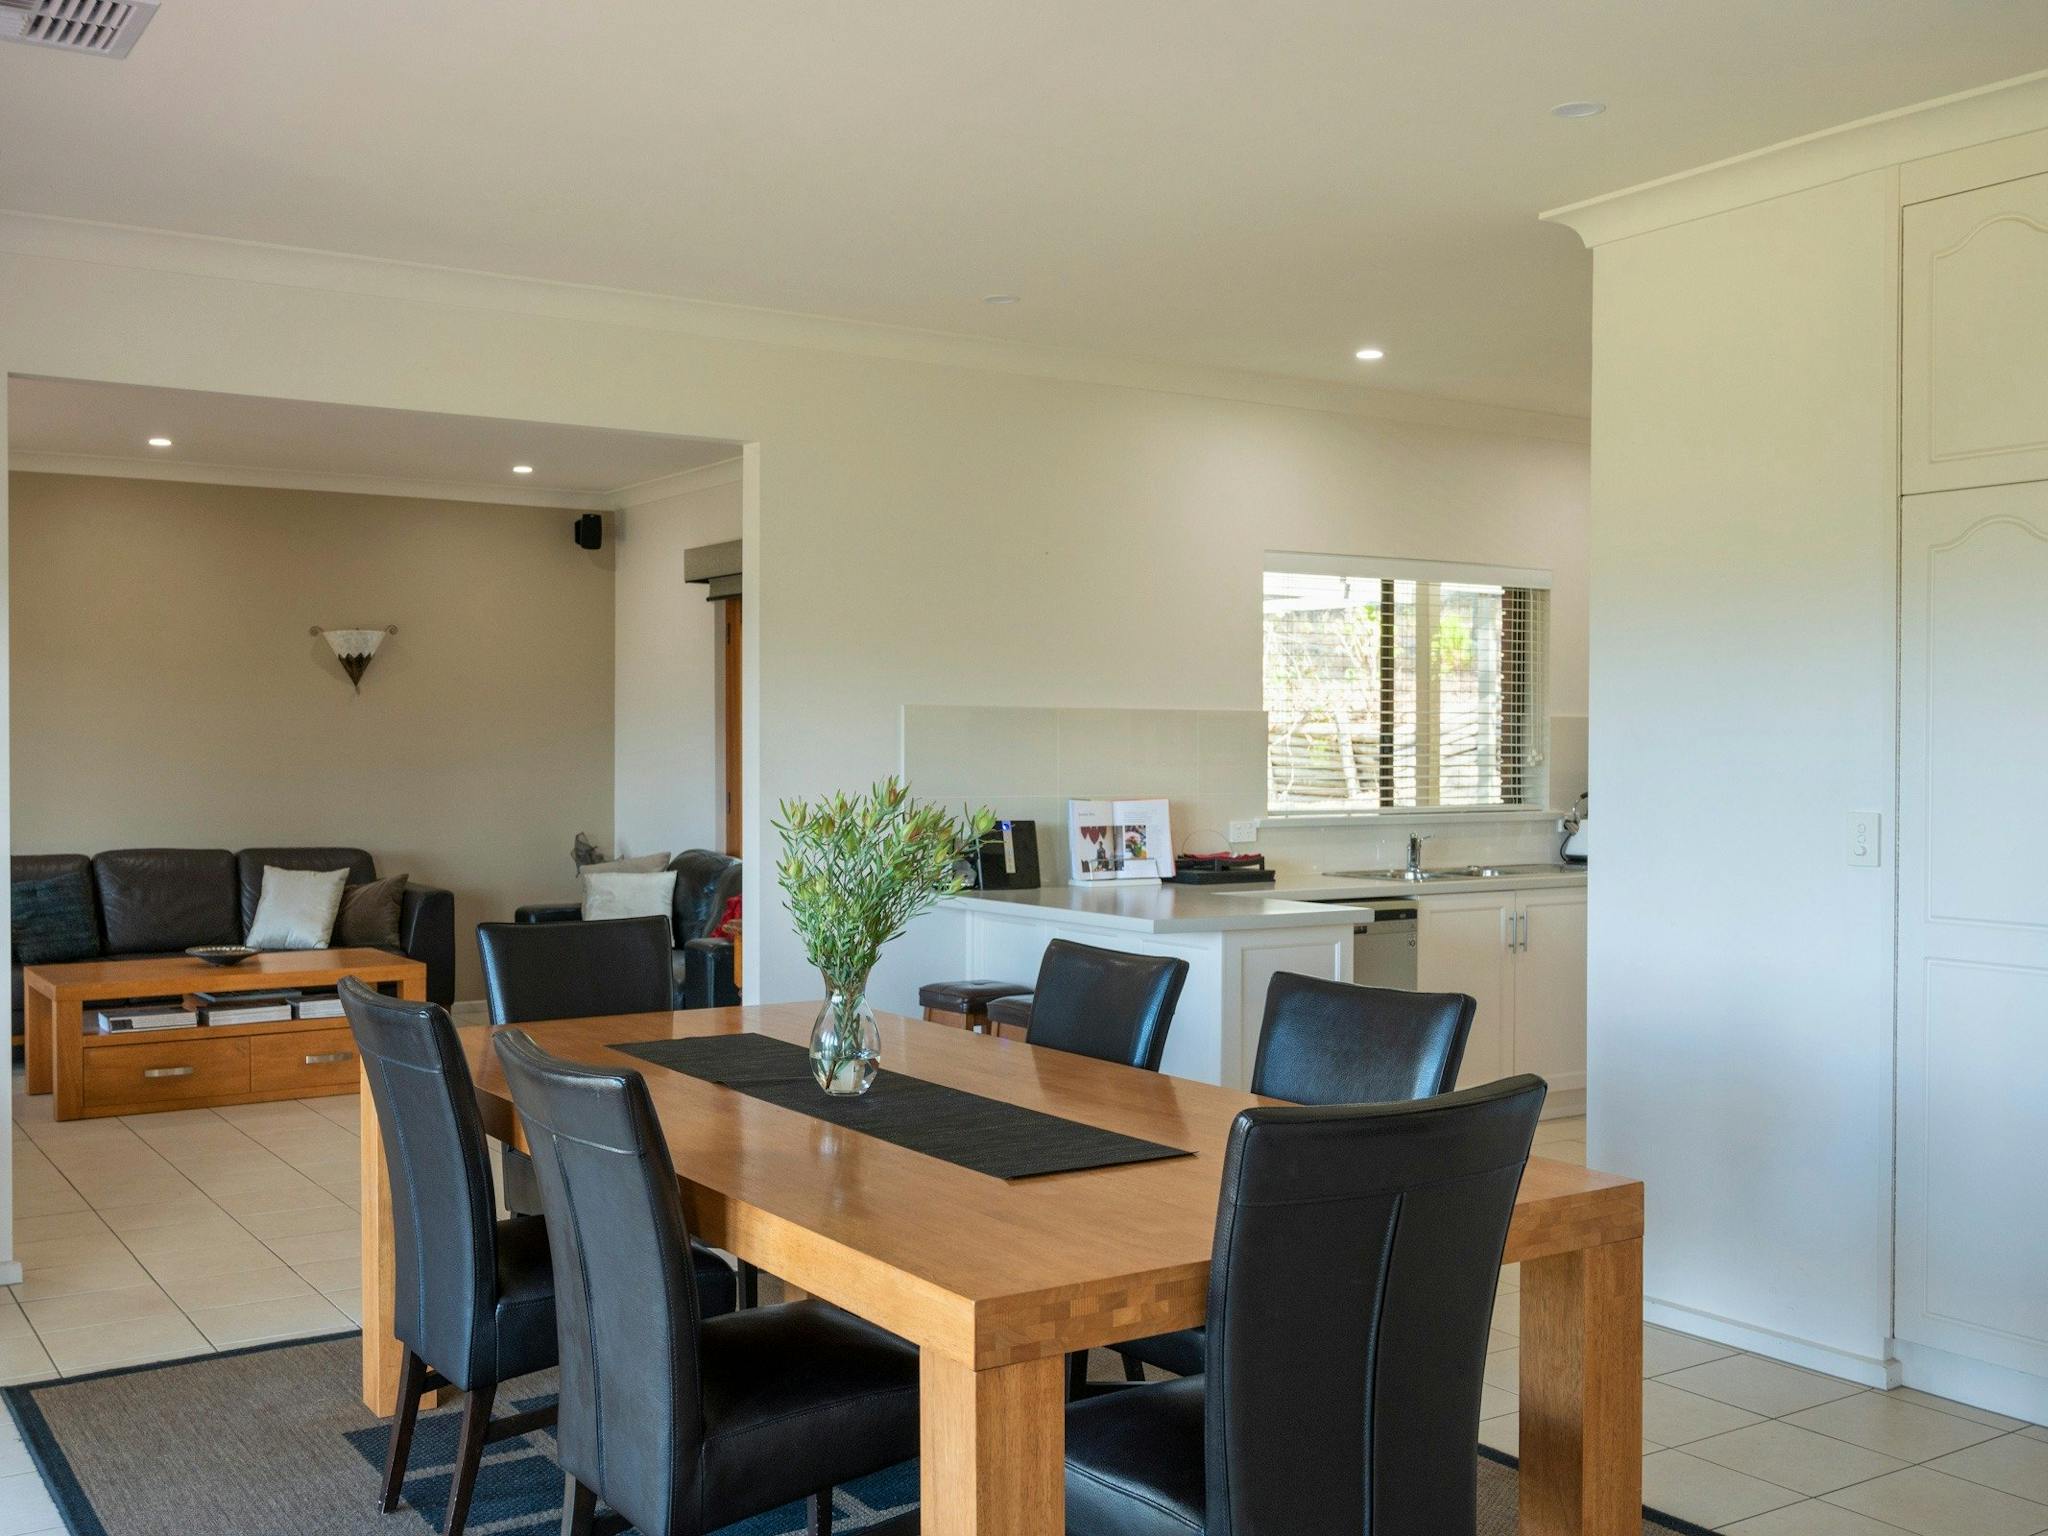 Fully equipped kitchen and all required for the intimate dinner party or local produce platter